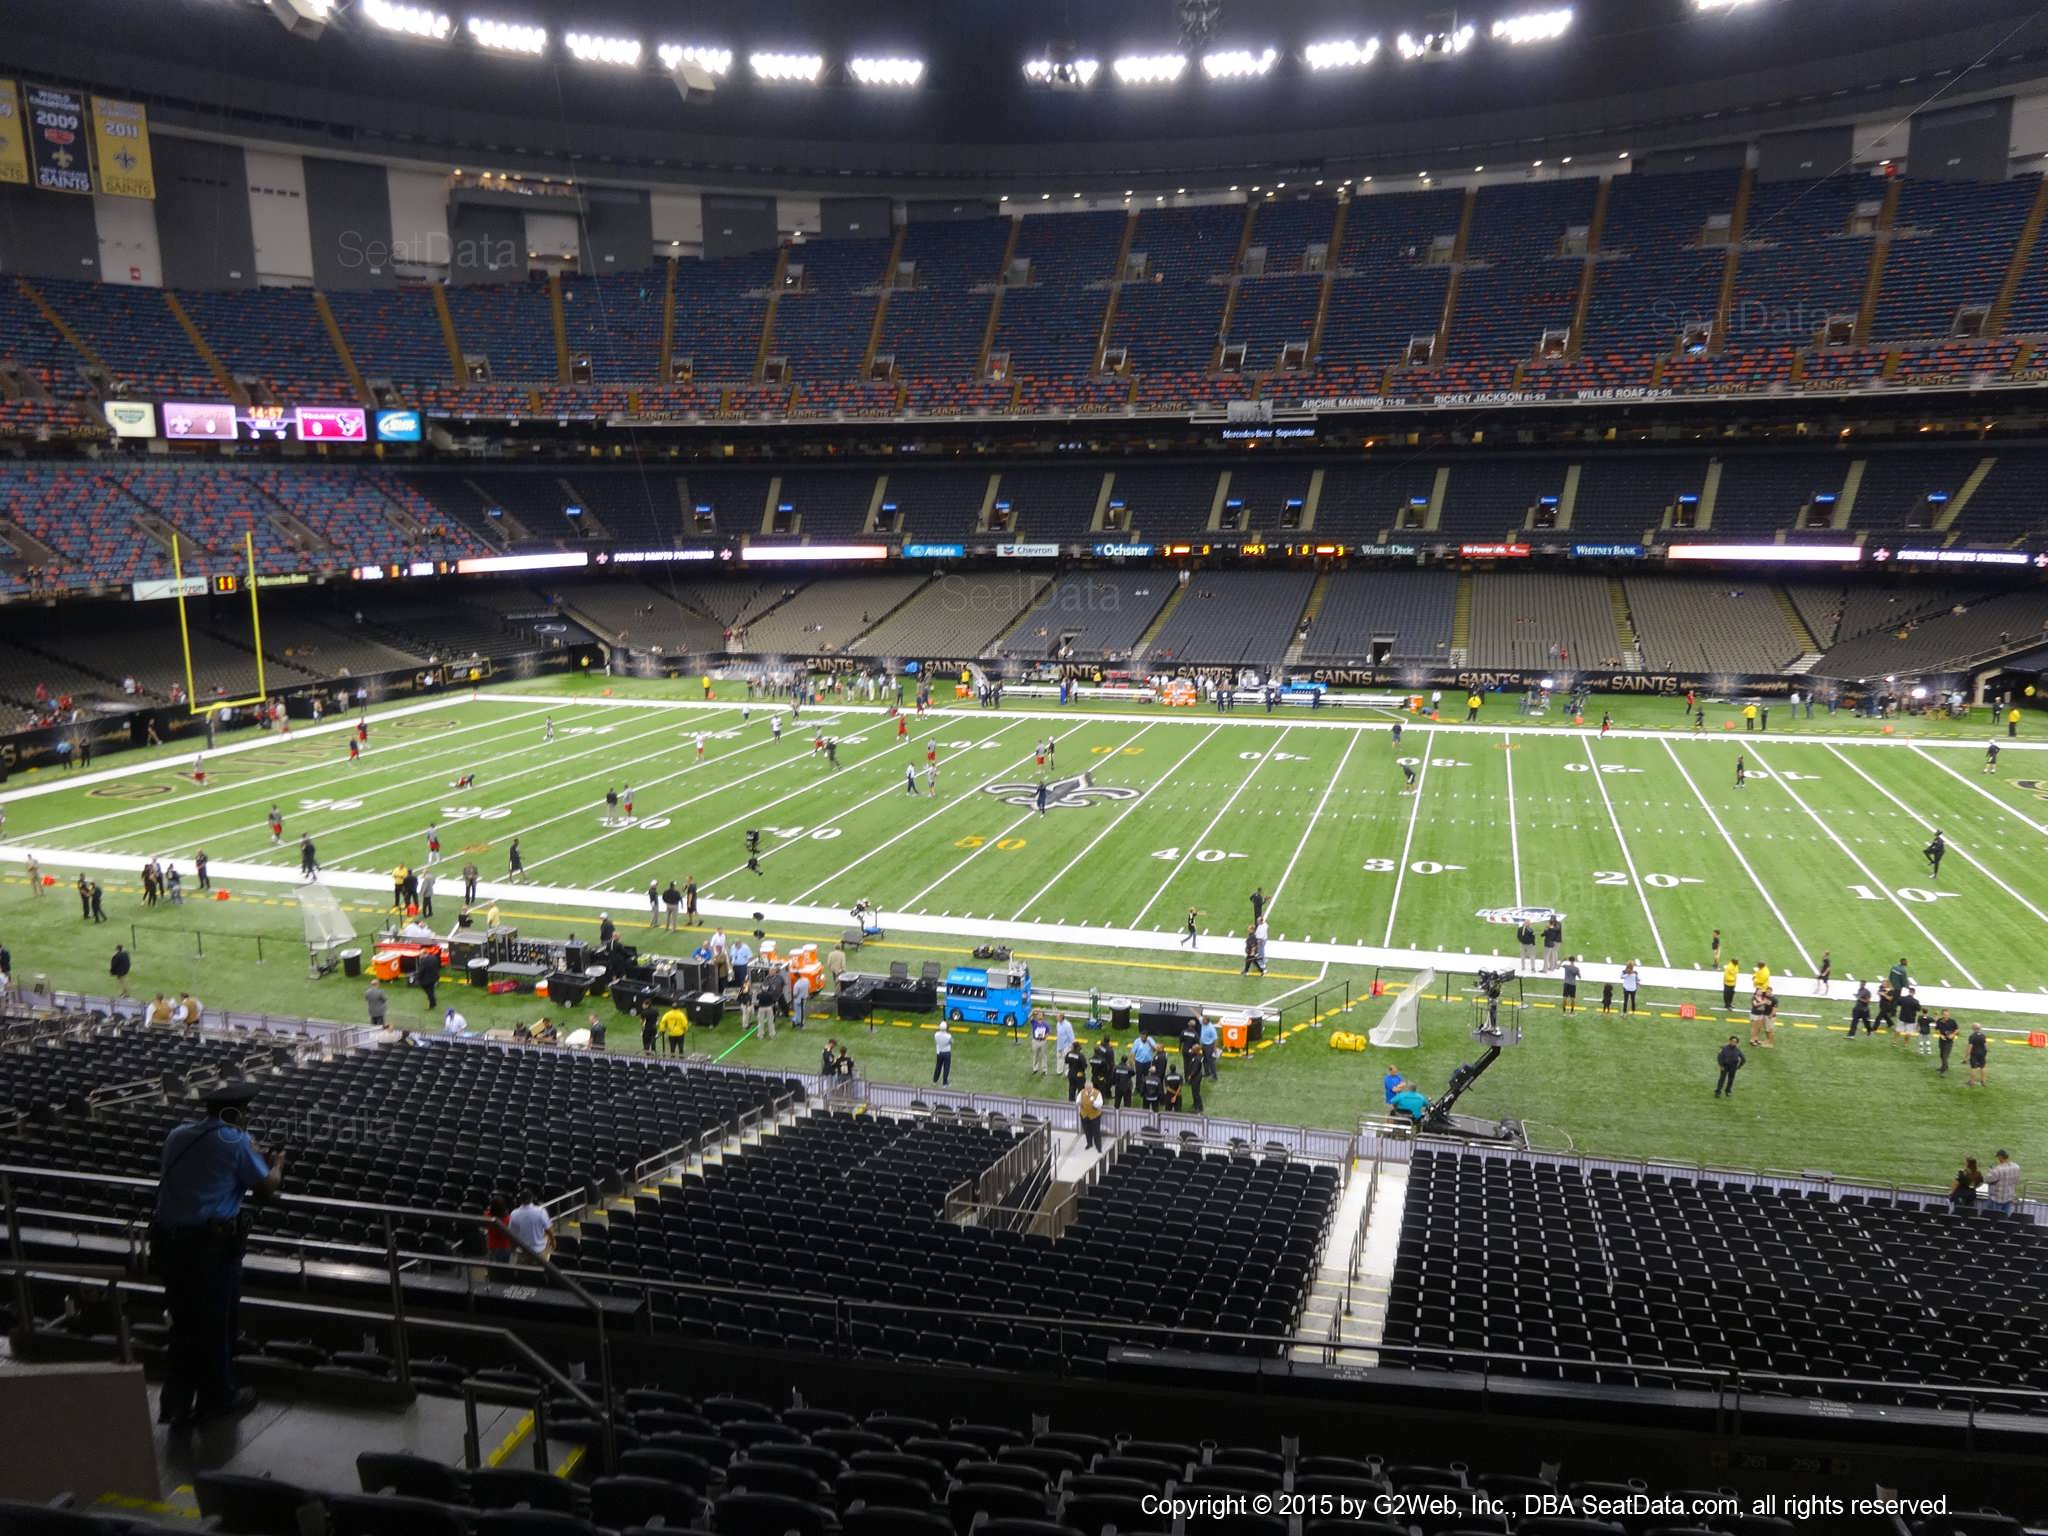 Seat view from section 334 at the Mercedes-Benz Superdome, home of the New Orleans Saints